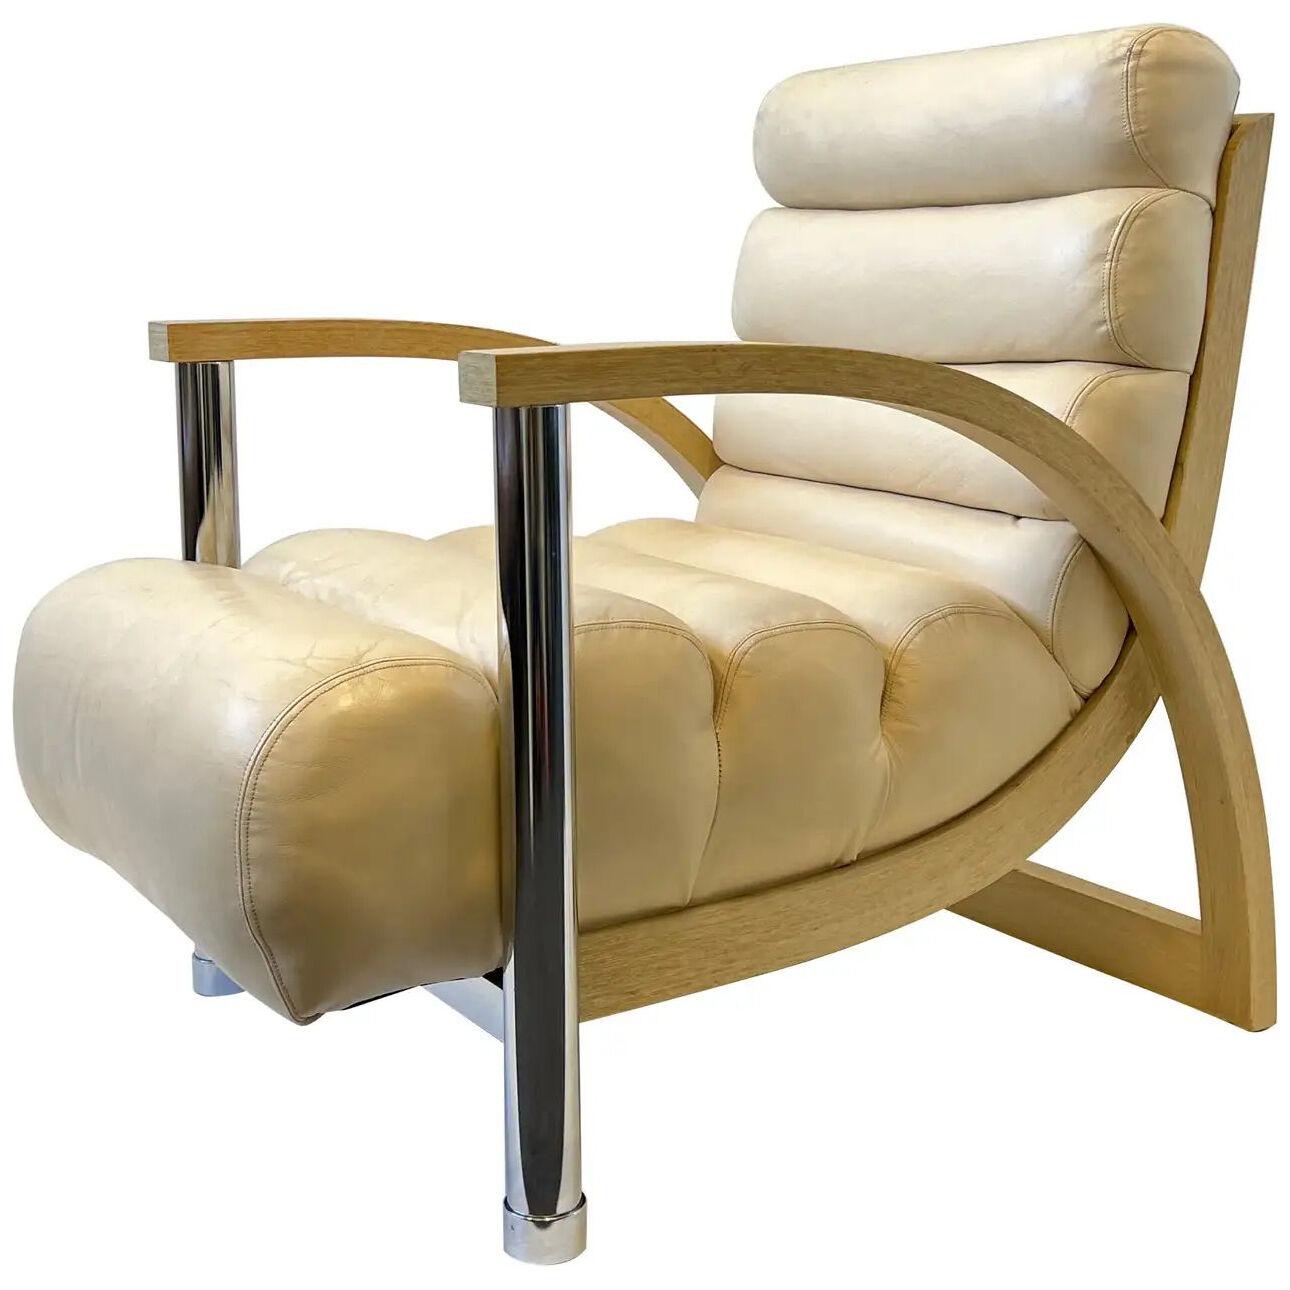 off White Leather and Chrome Lounge Chair by Jay Spectre